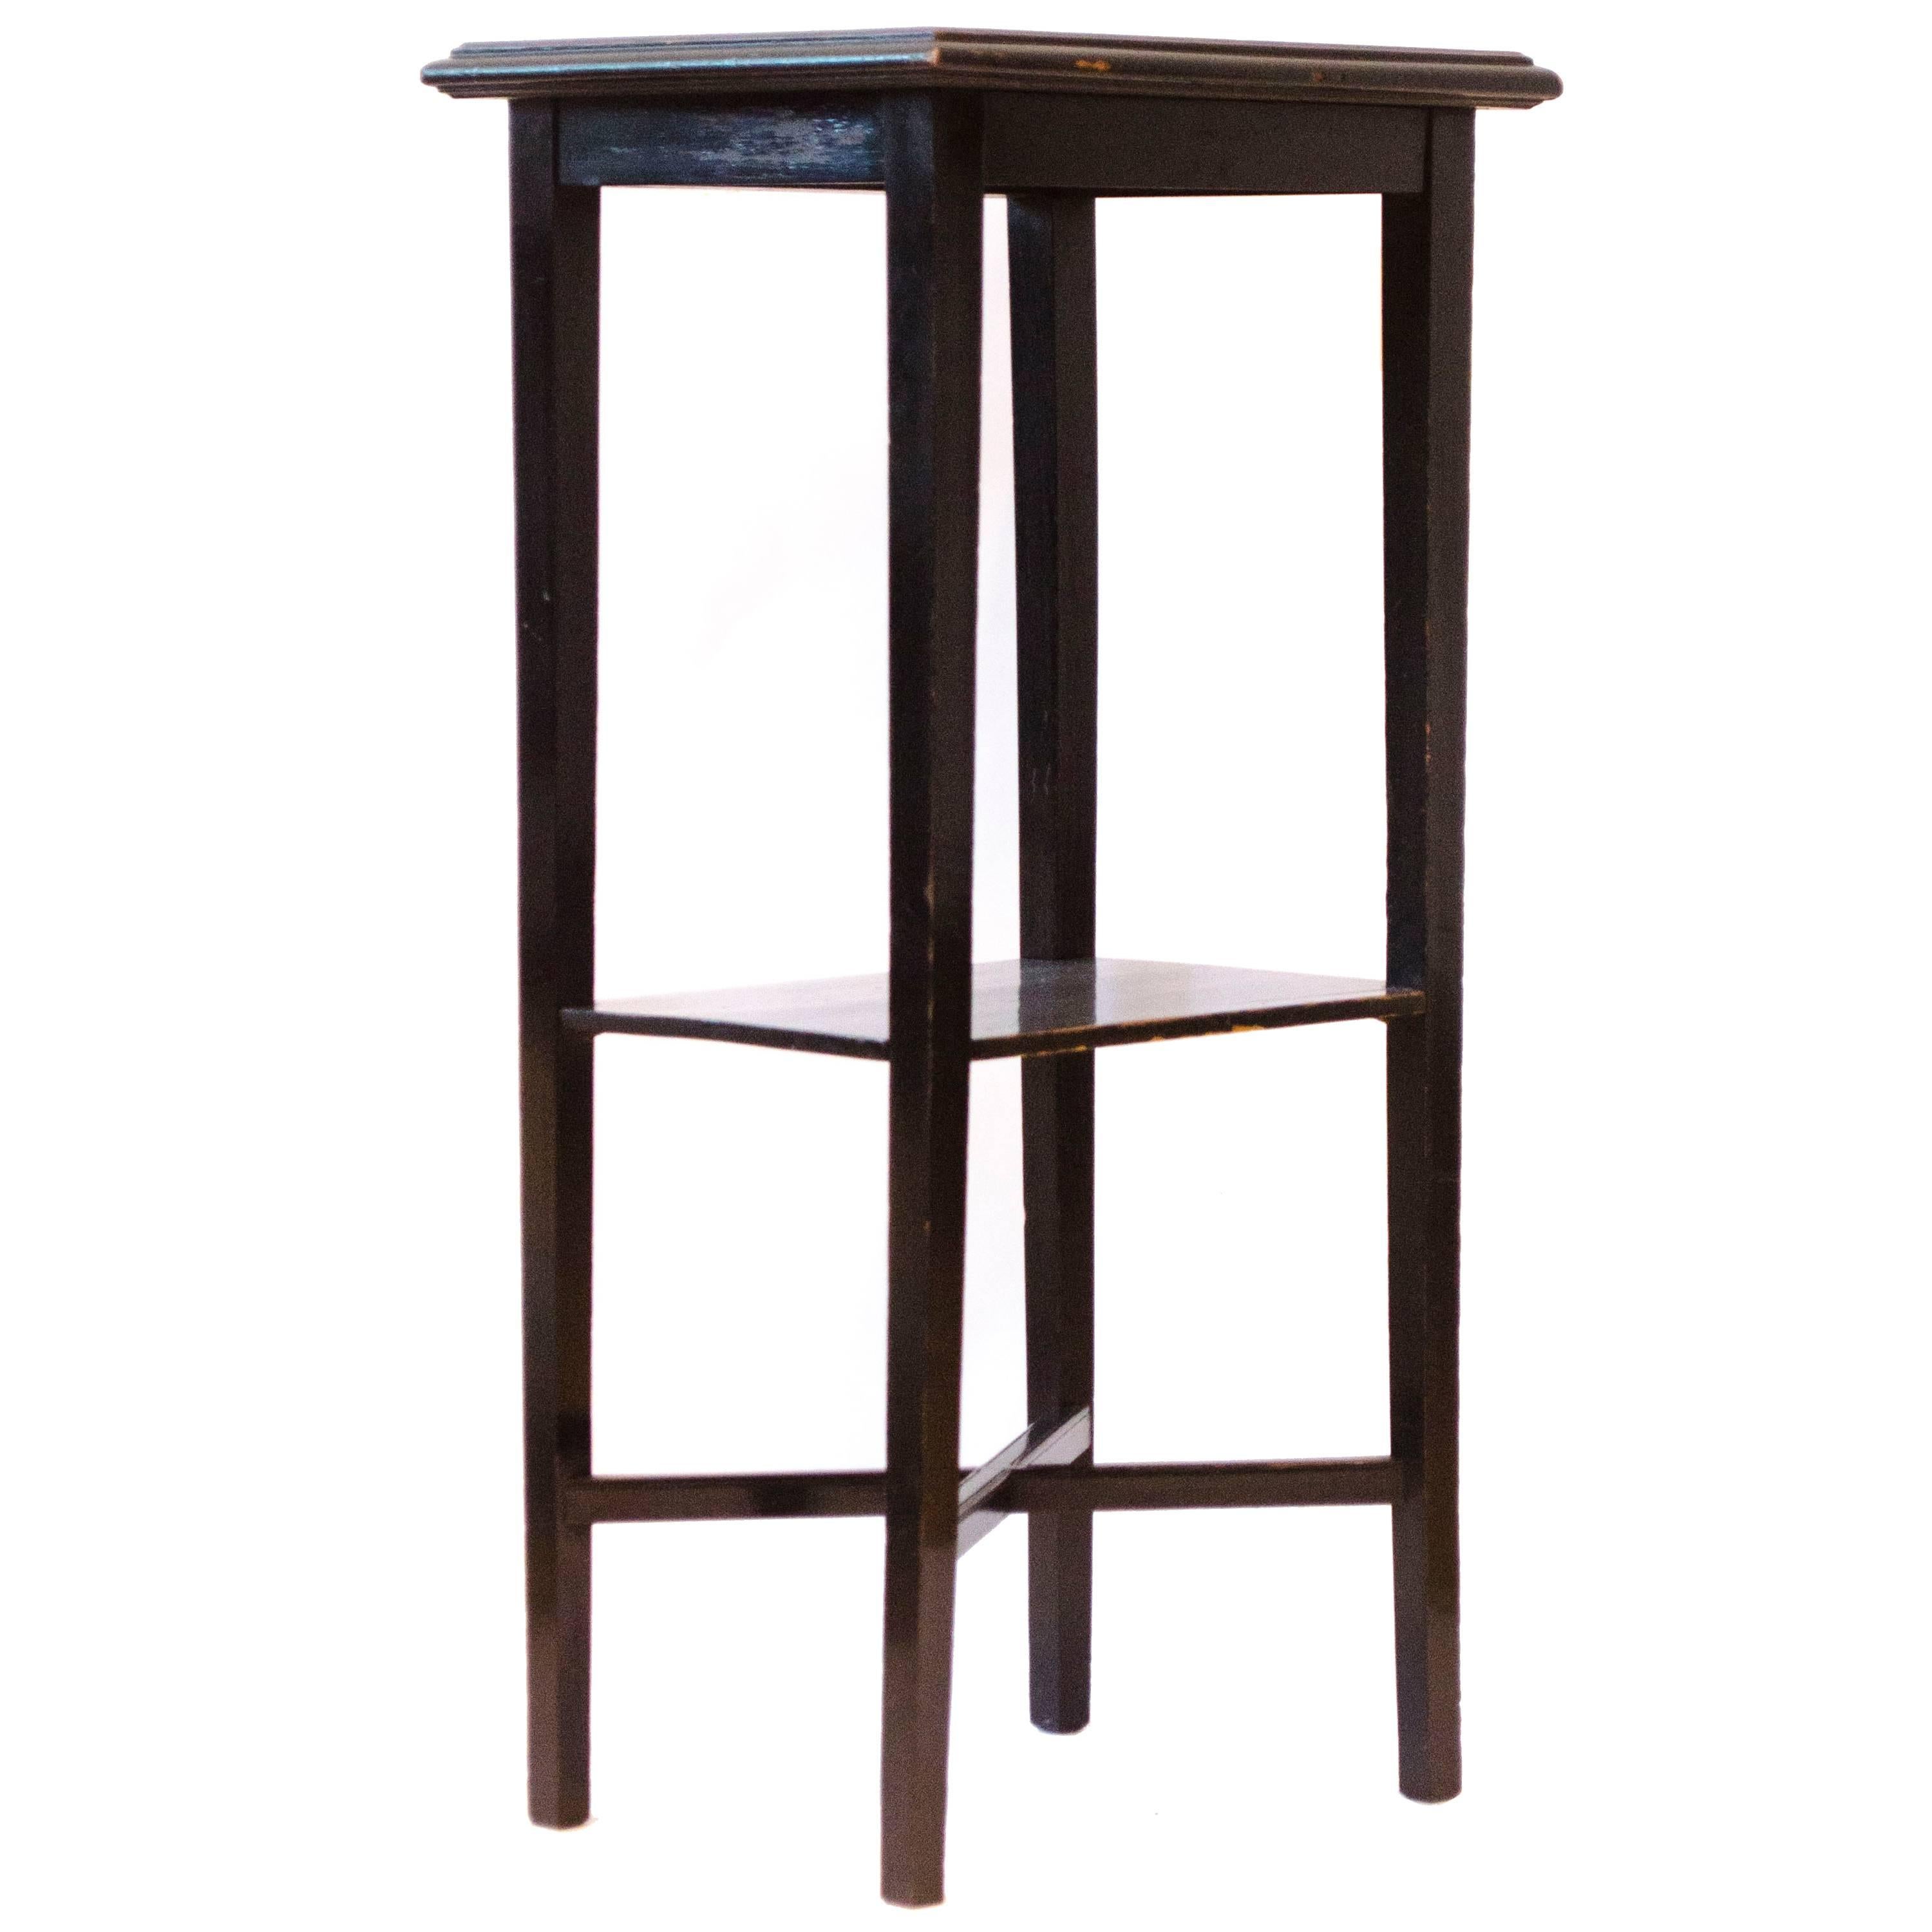 Aesthetic Movement ebonized side table with hand painted floral tile to the Top For Sale